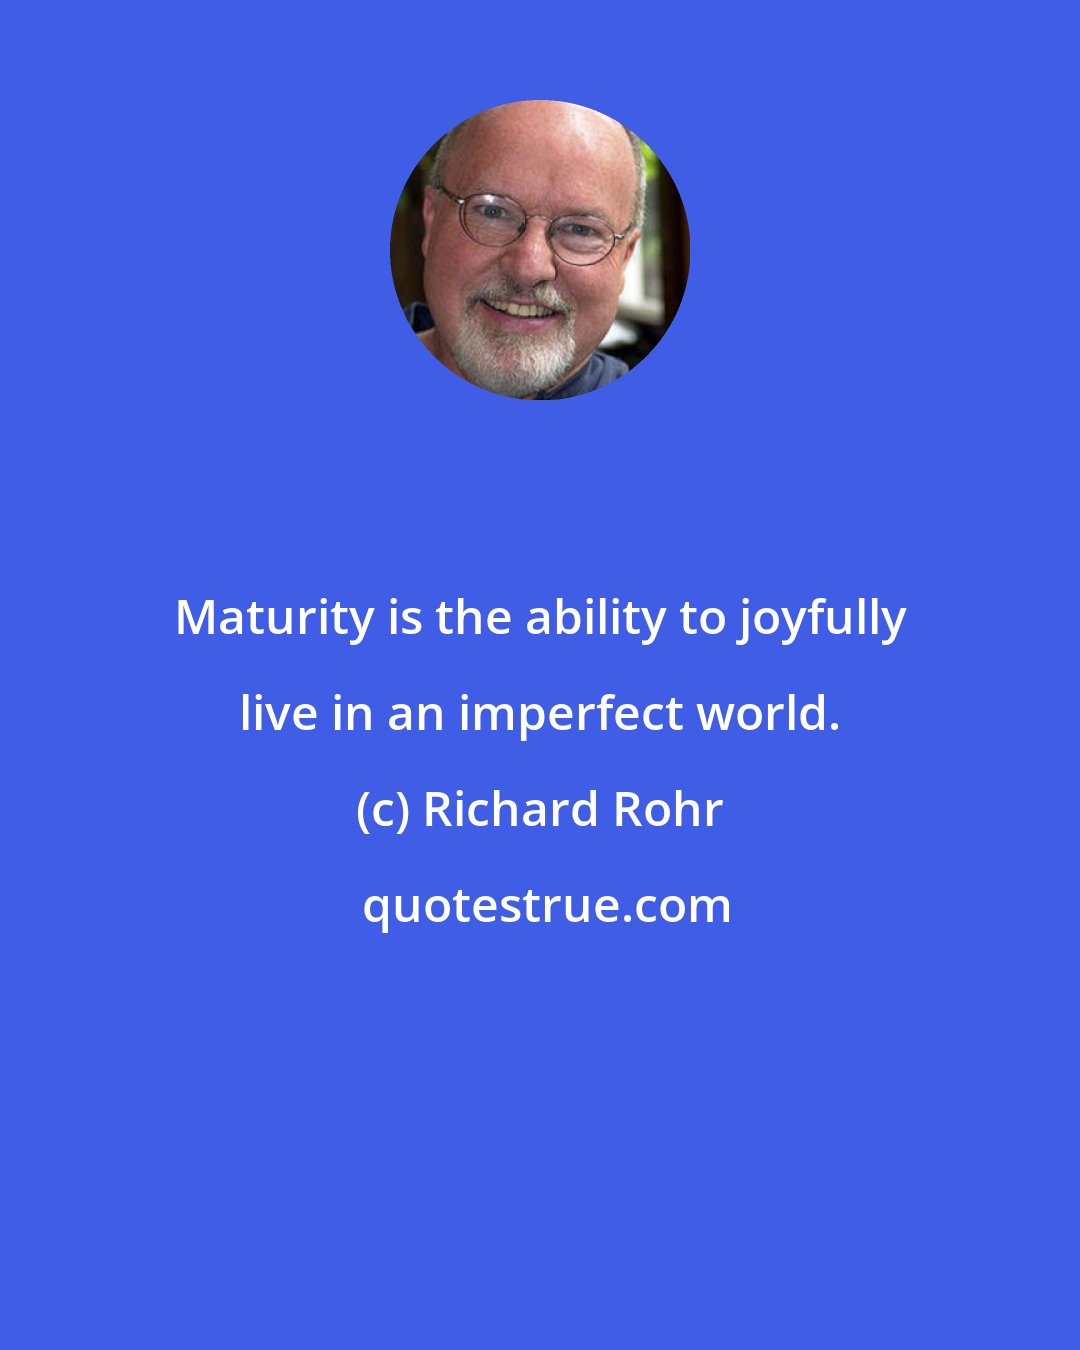 Richard Rohr: Maturity is the ability to joyfully live in an imperfect world.